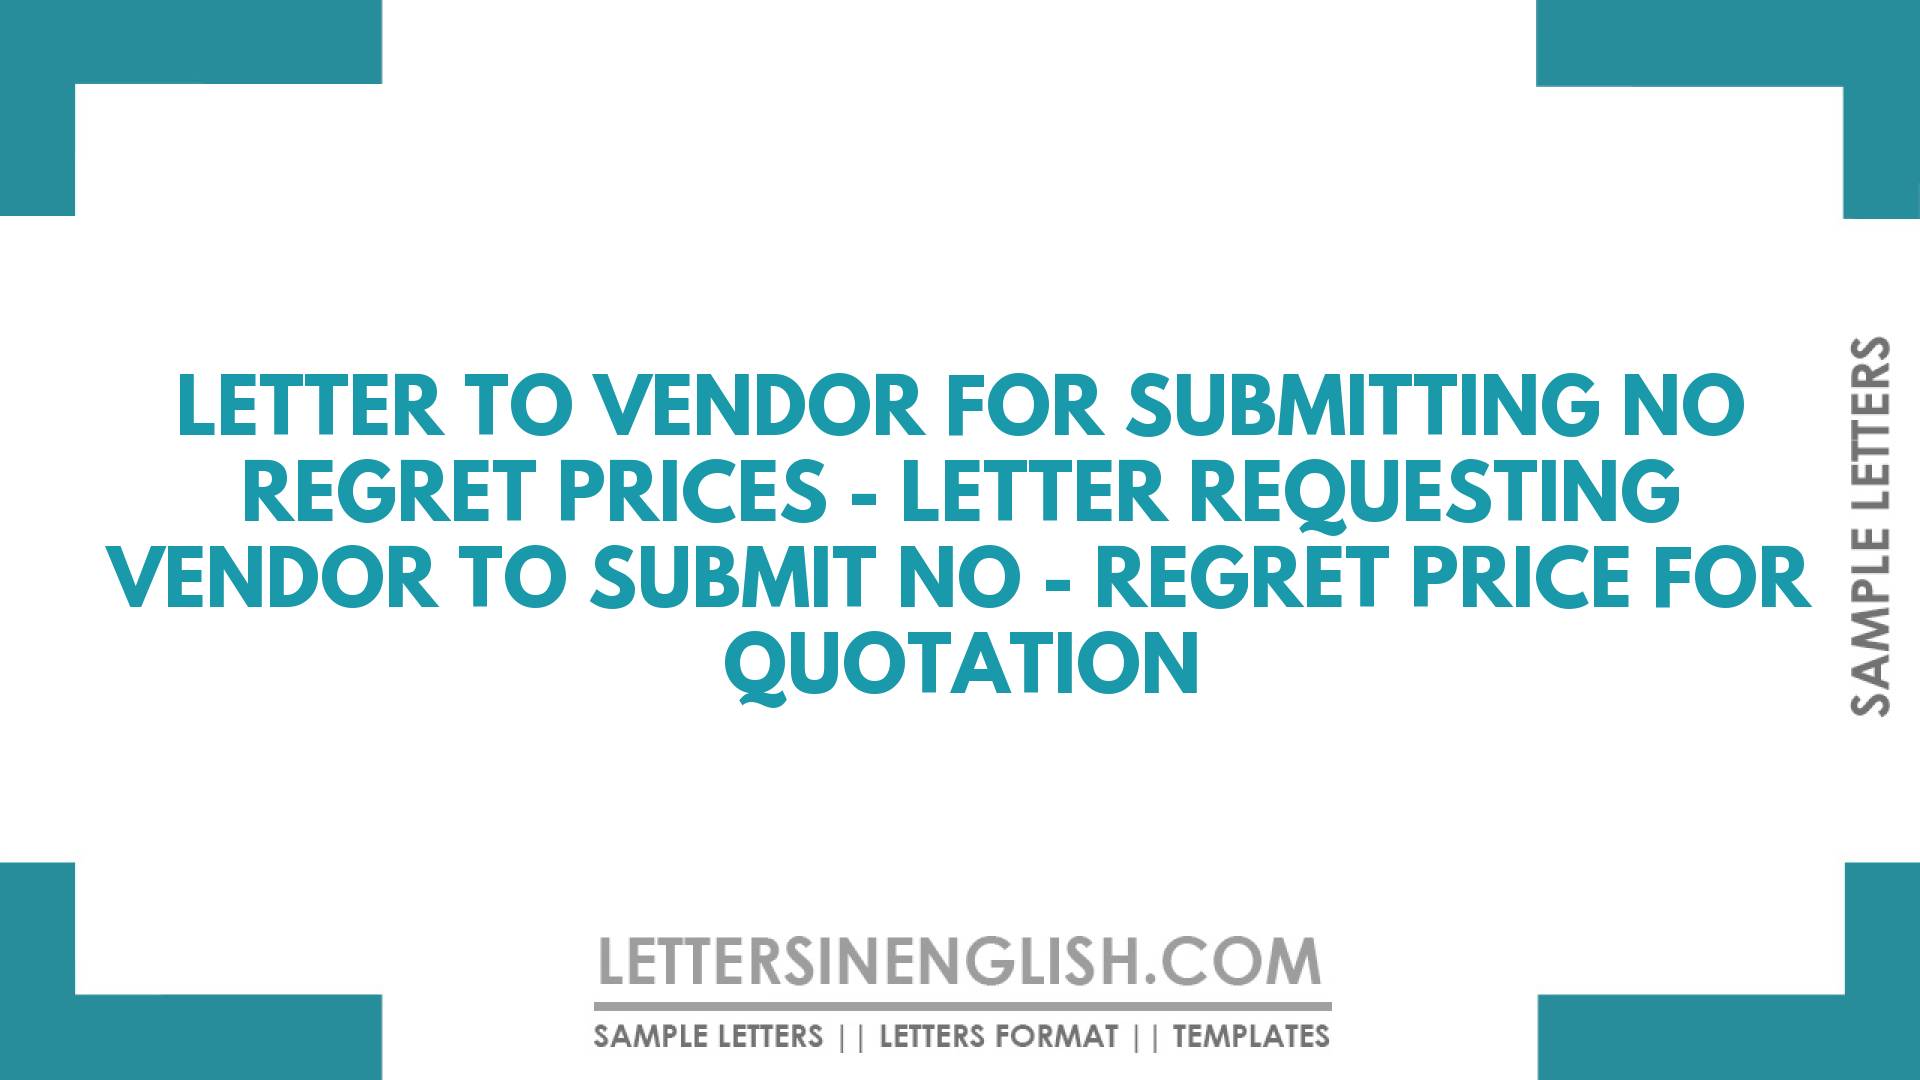 Letter to Vendor for Submitting no Regret Prices – Letter Requesting Vendor to Submit No – Regret Price for Quotation